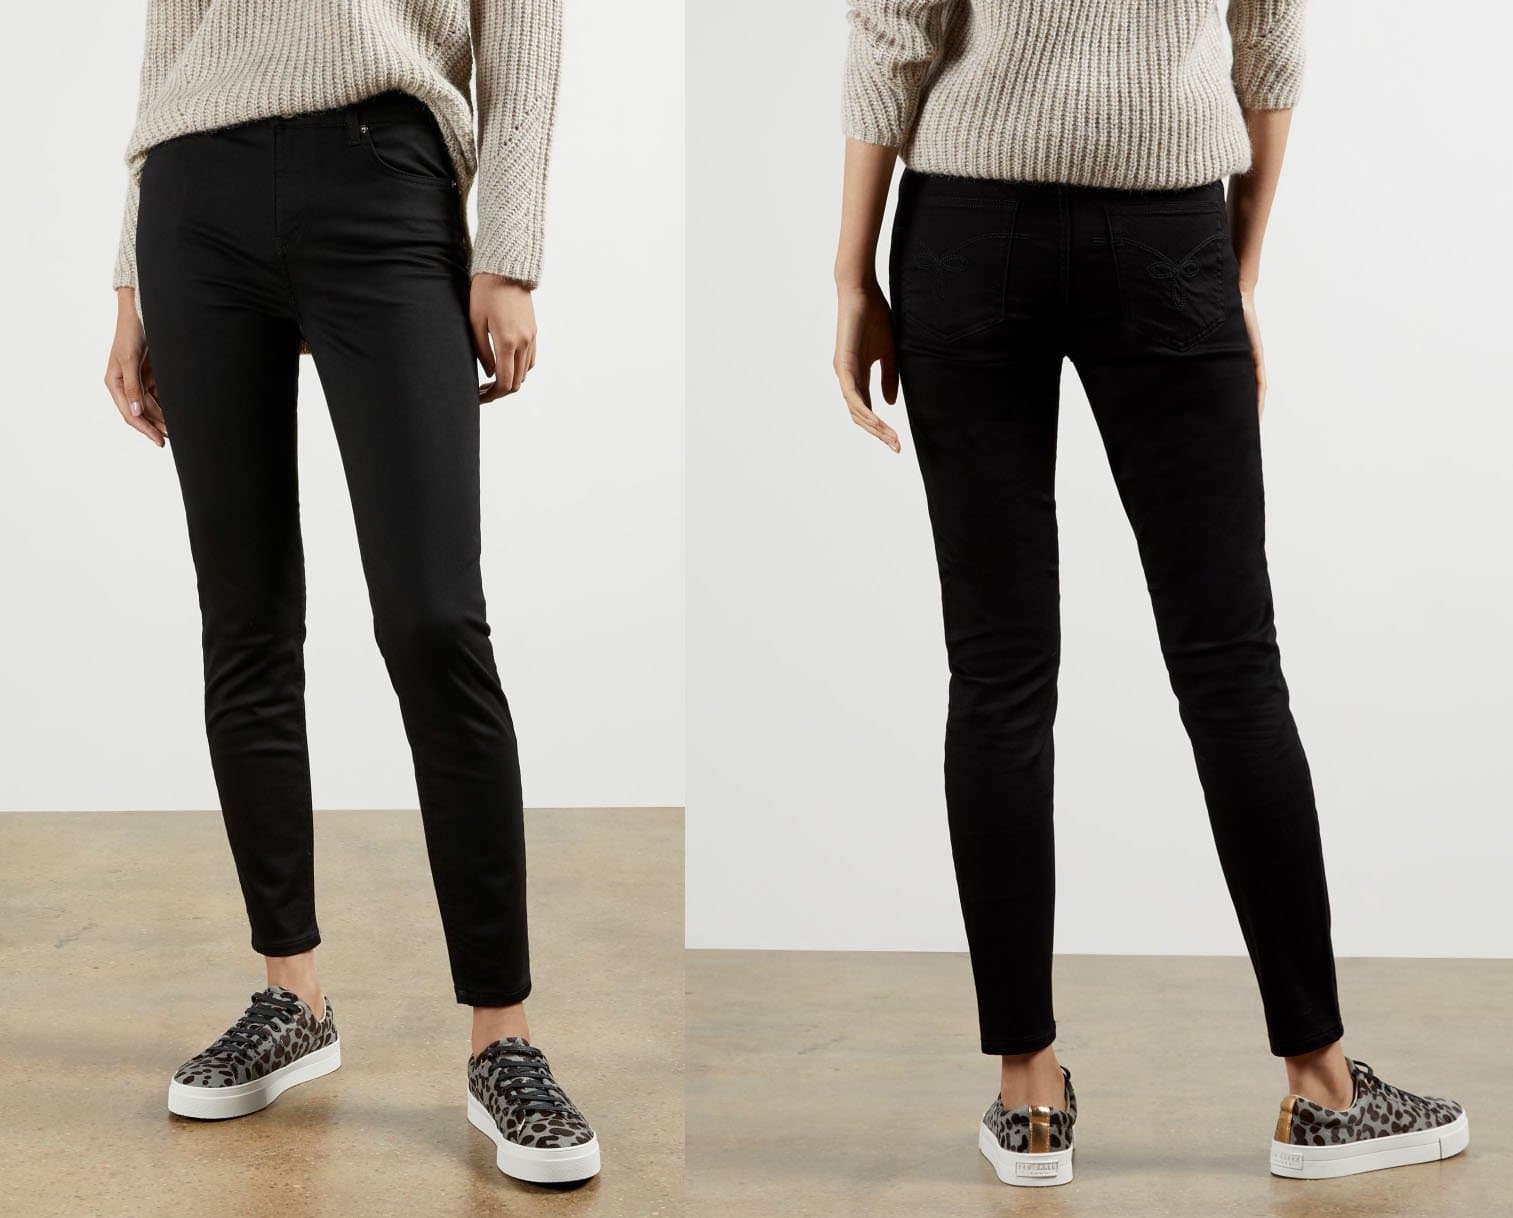 The versatile Duvv jeans are cut in a flattering contemporary skinny fit